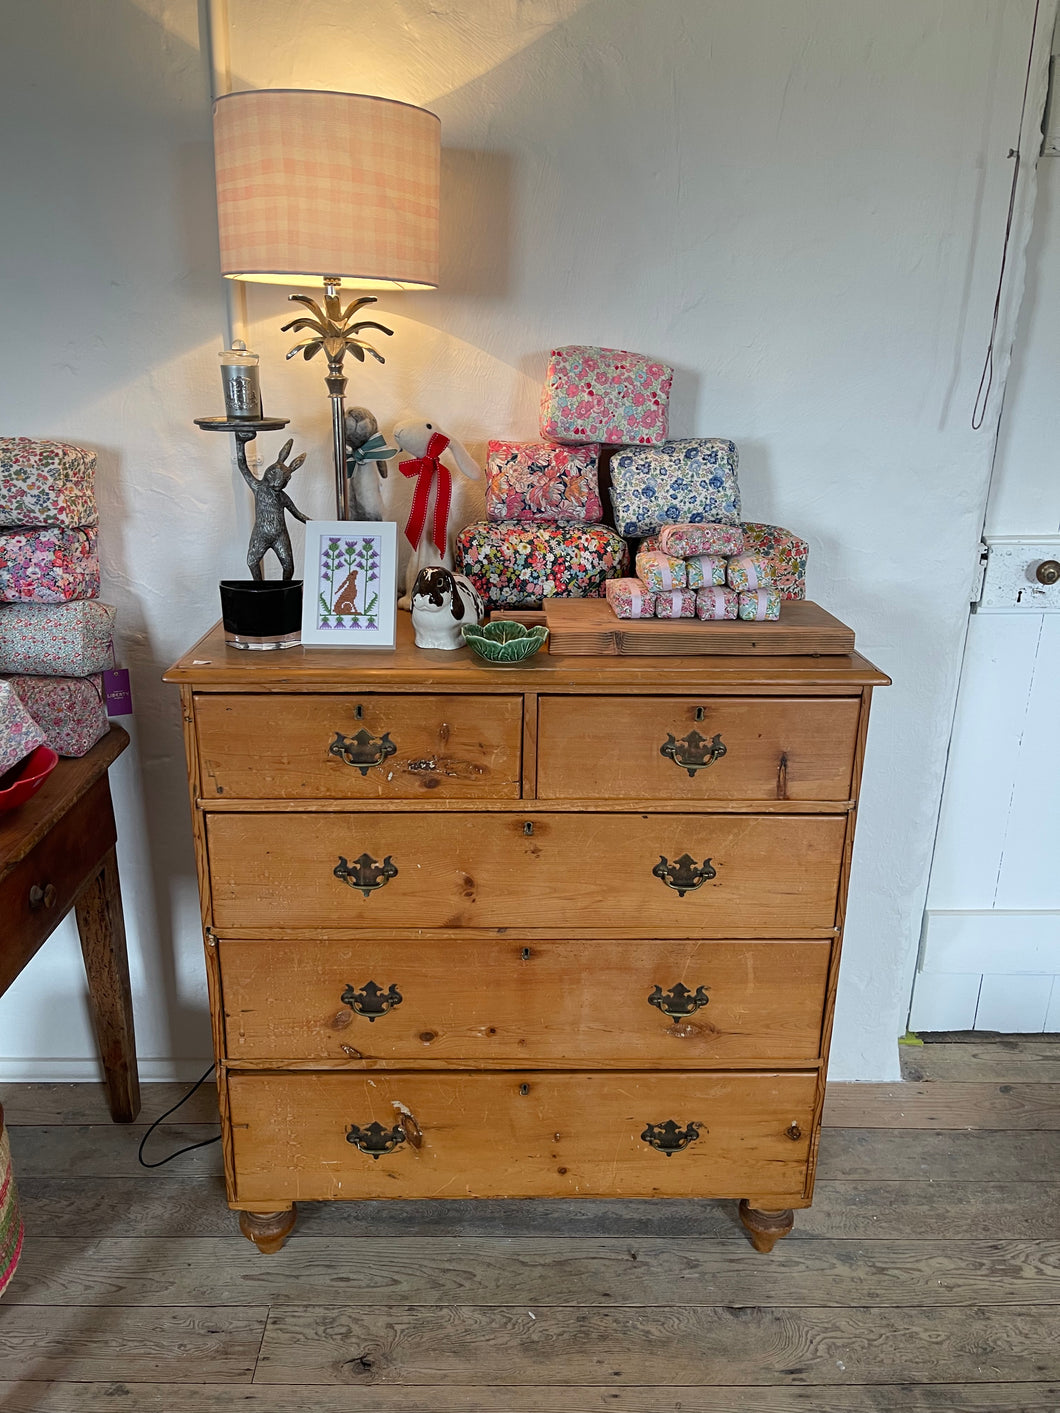 Antique pine chest of drawers imported from UK